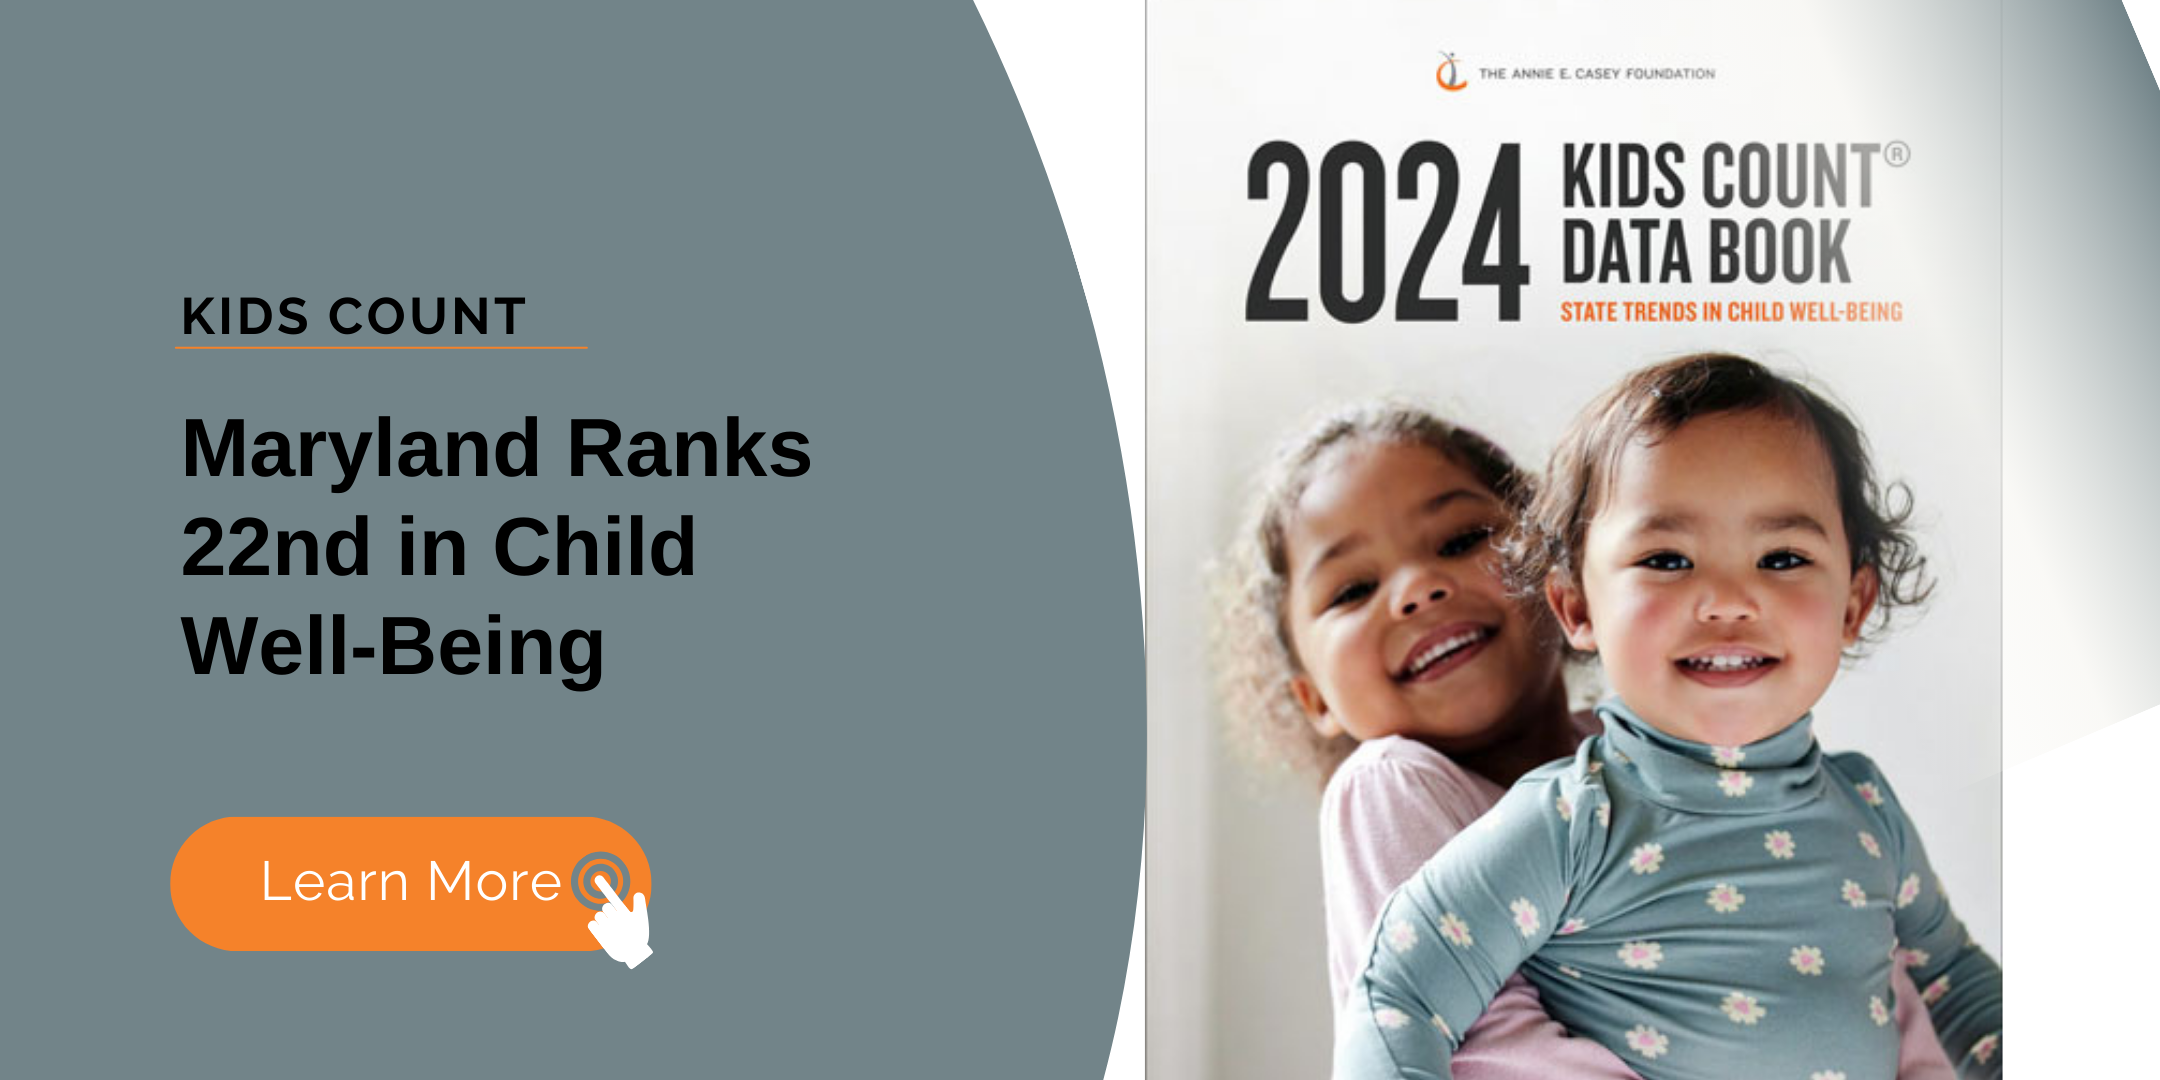 2024 KIDS COUNT Data Book